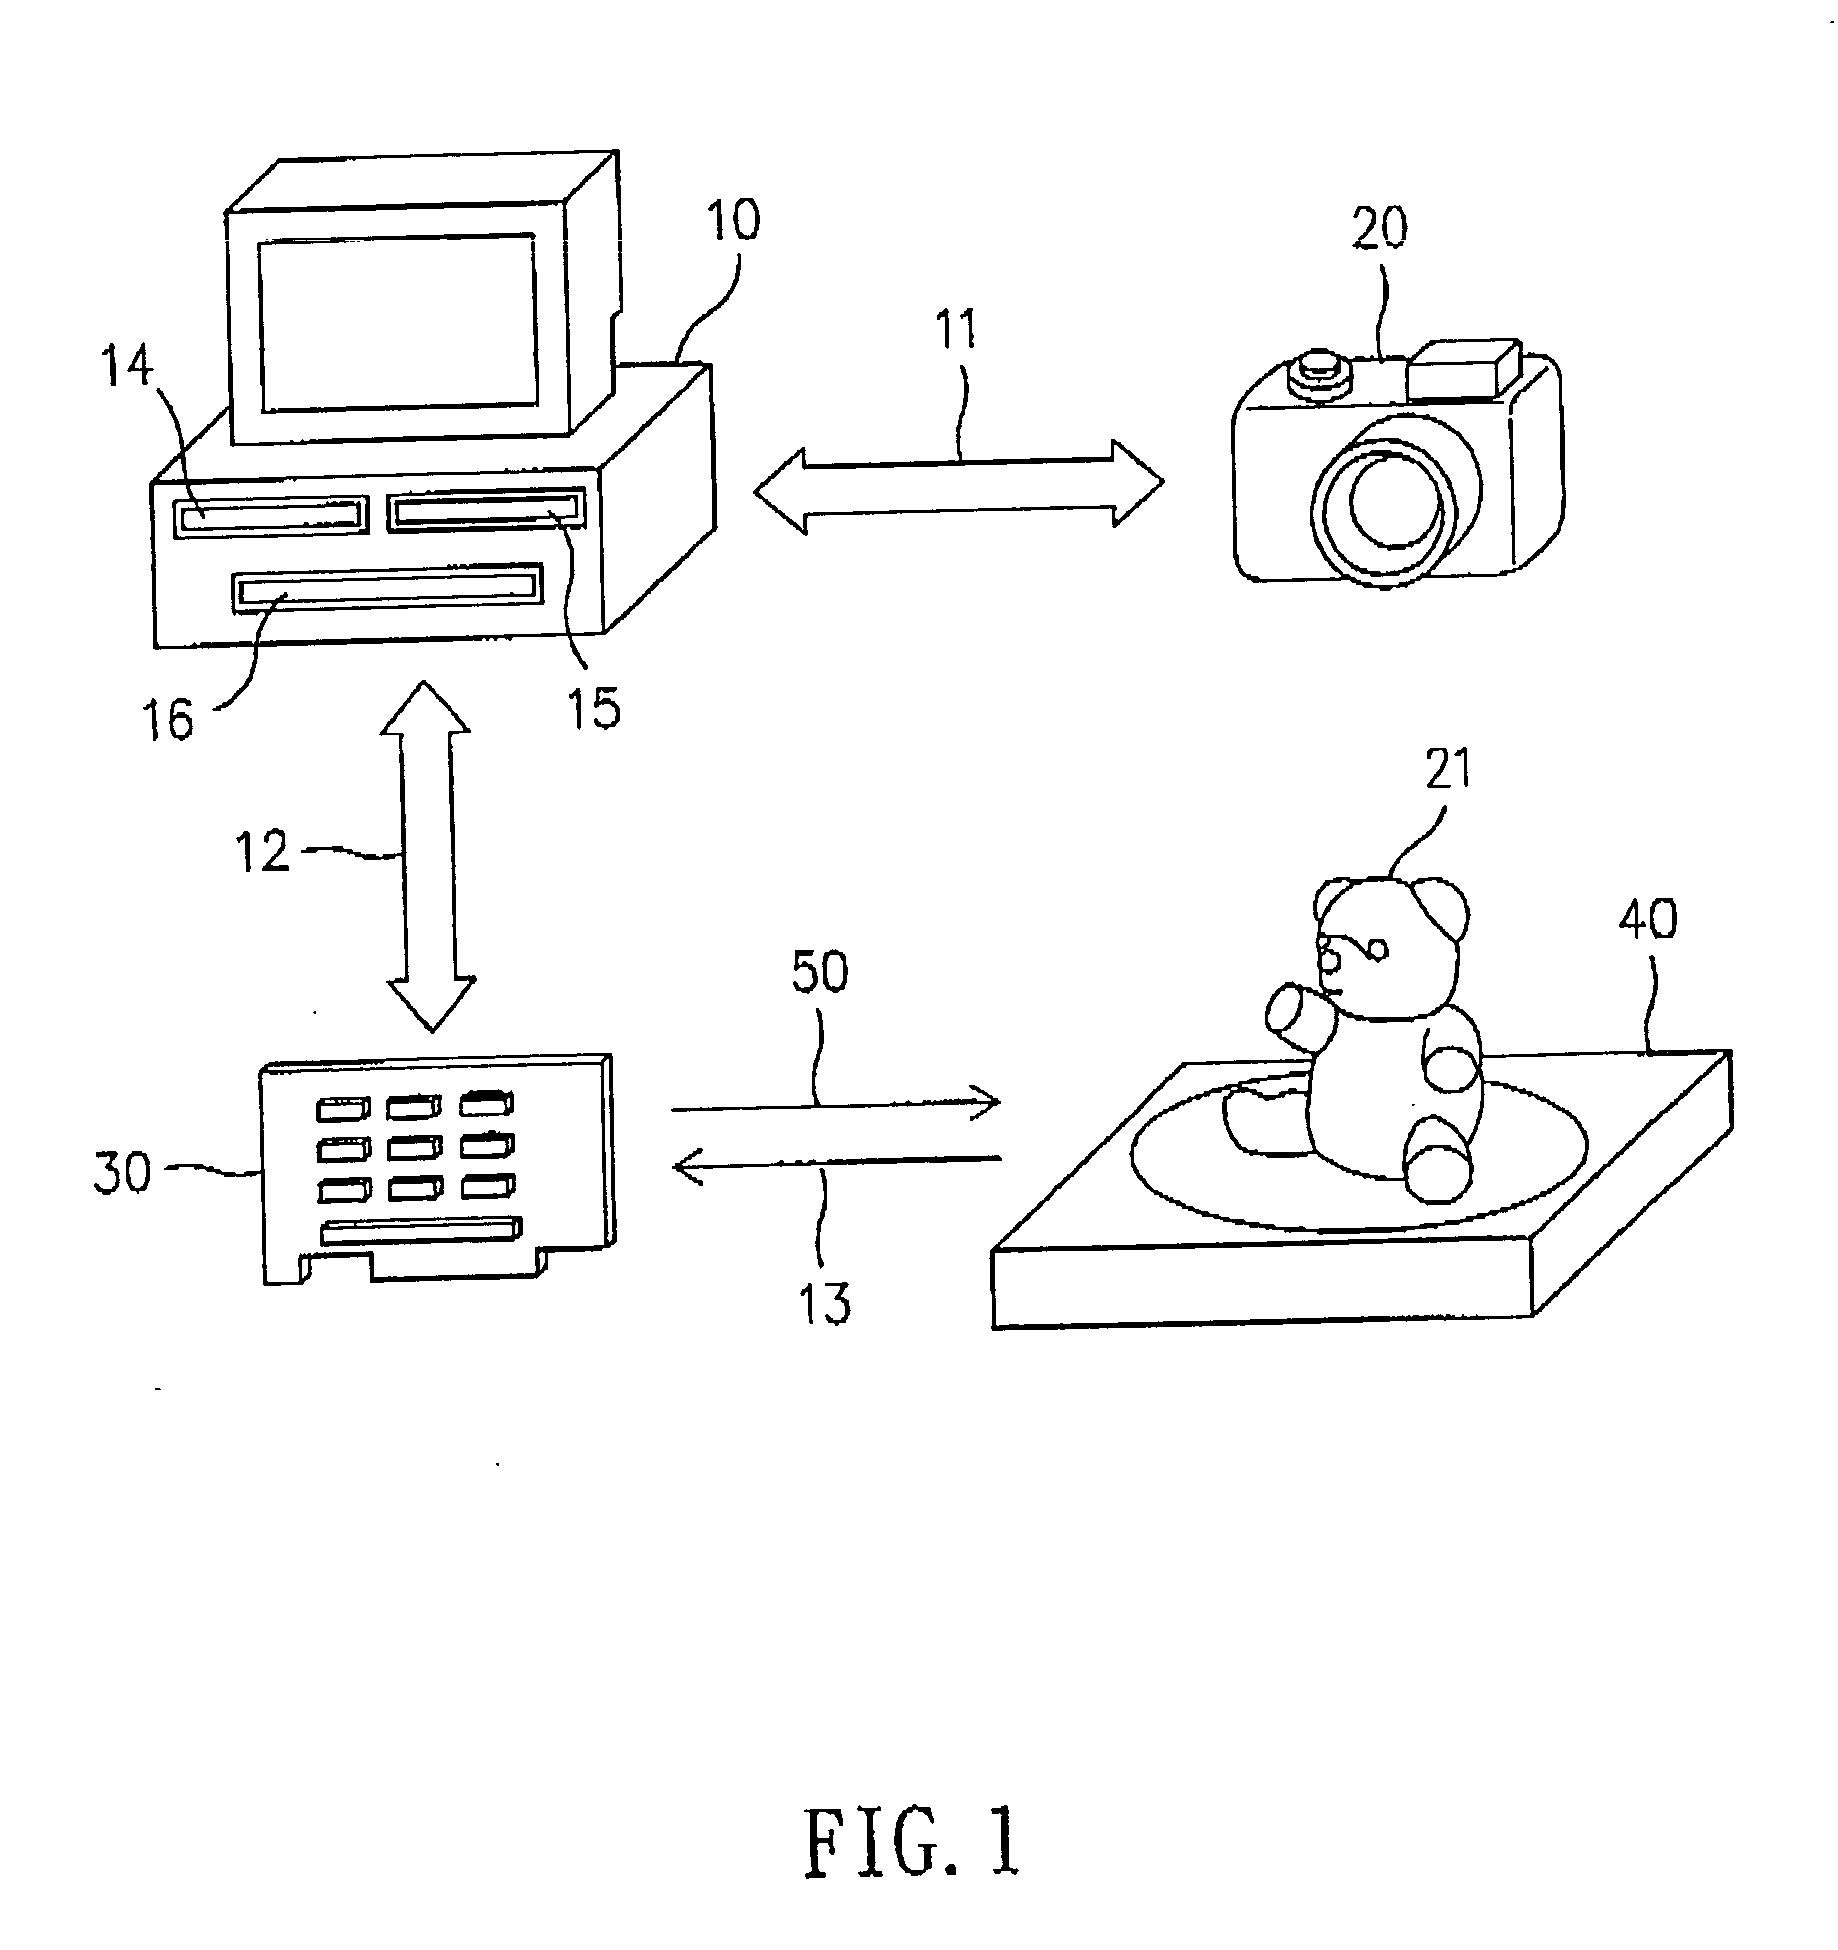 Computer controlled system for synchronizing photography implementation between a 3-D turntable and an image capture device with automatic image format conversion